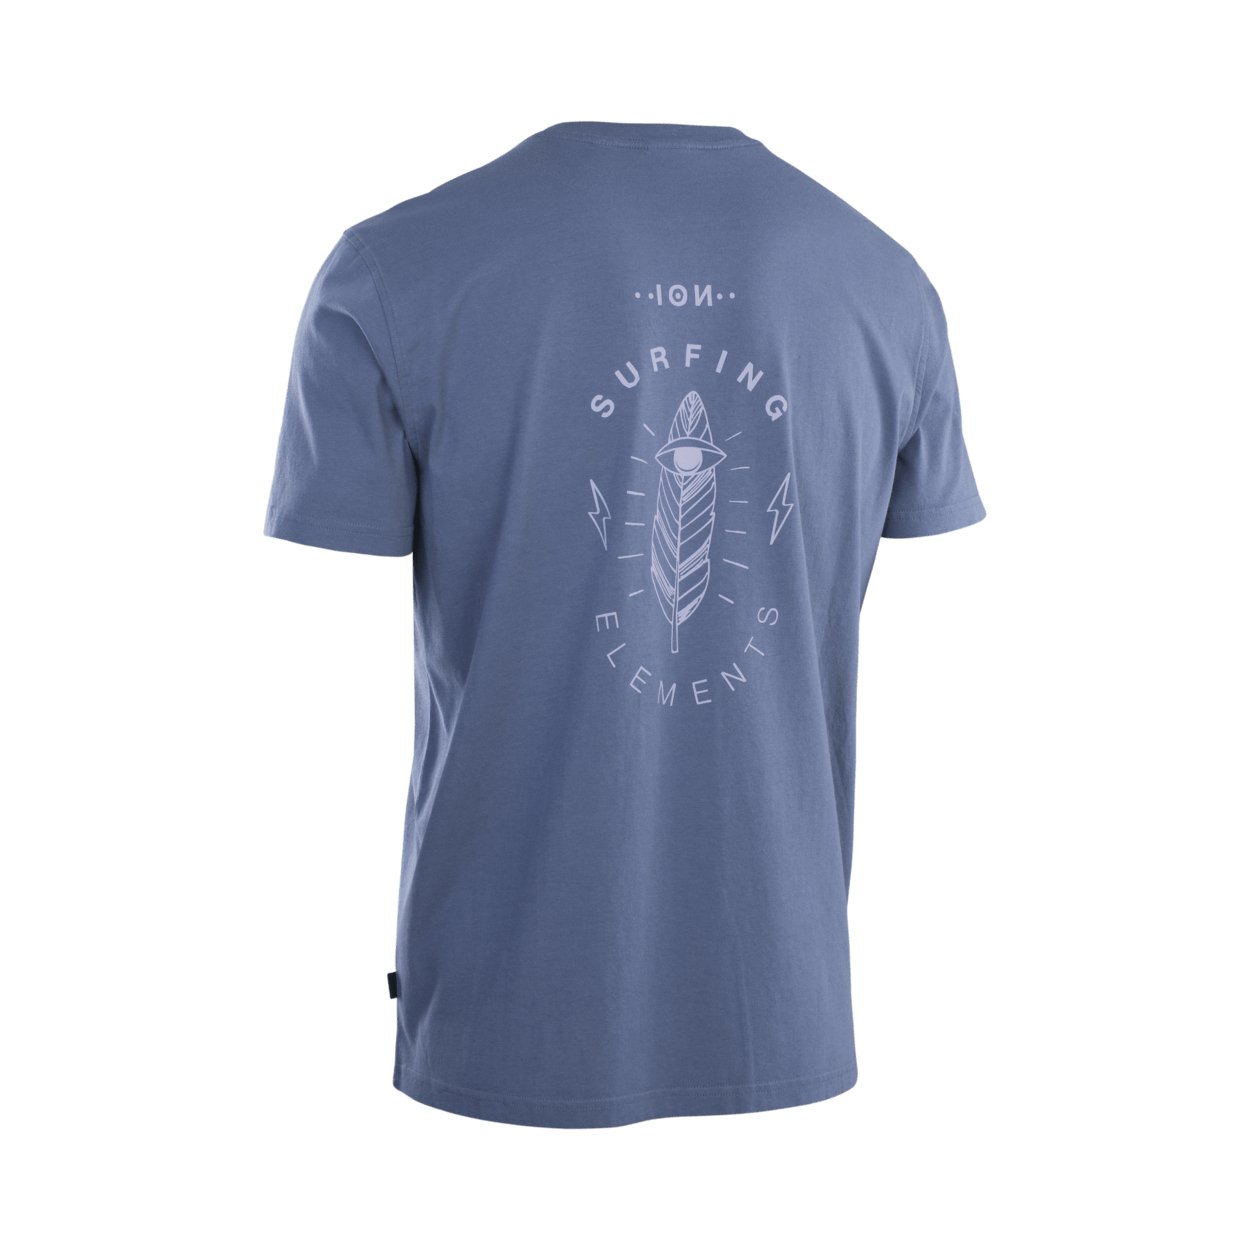 ION Tee Graphic SS men 2023 - Worthing Watersports - 9010583102146 - Apparel - ION Bike